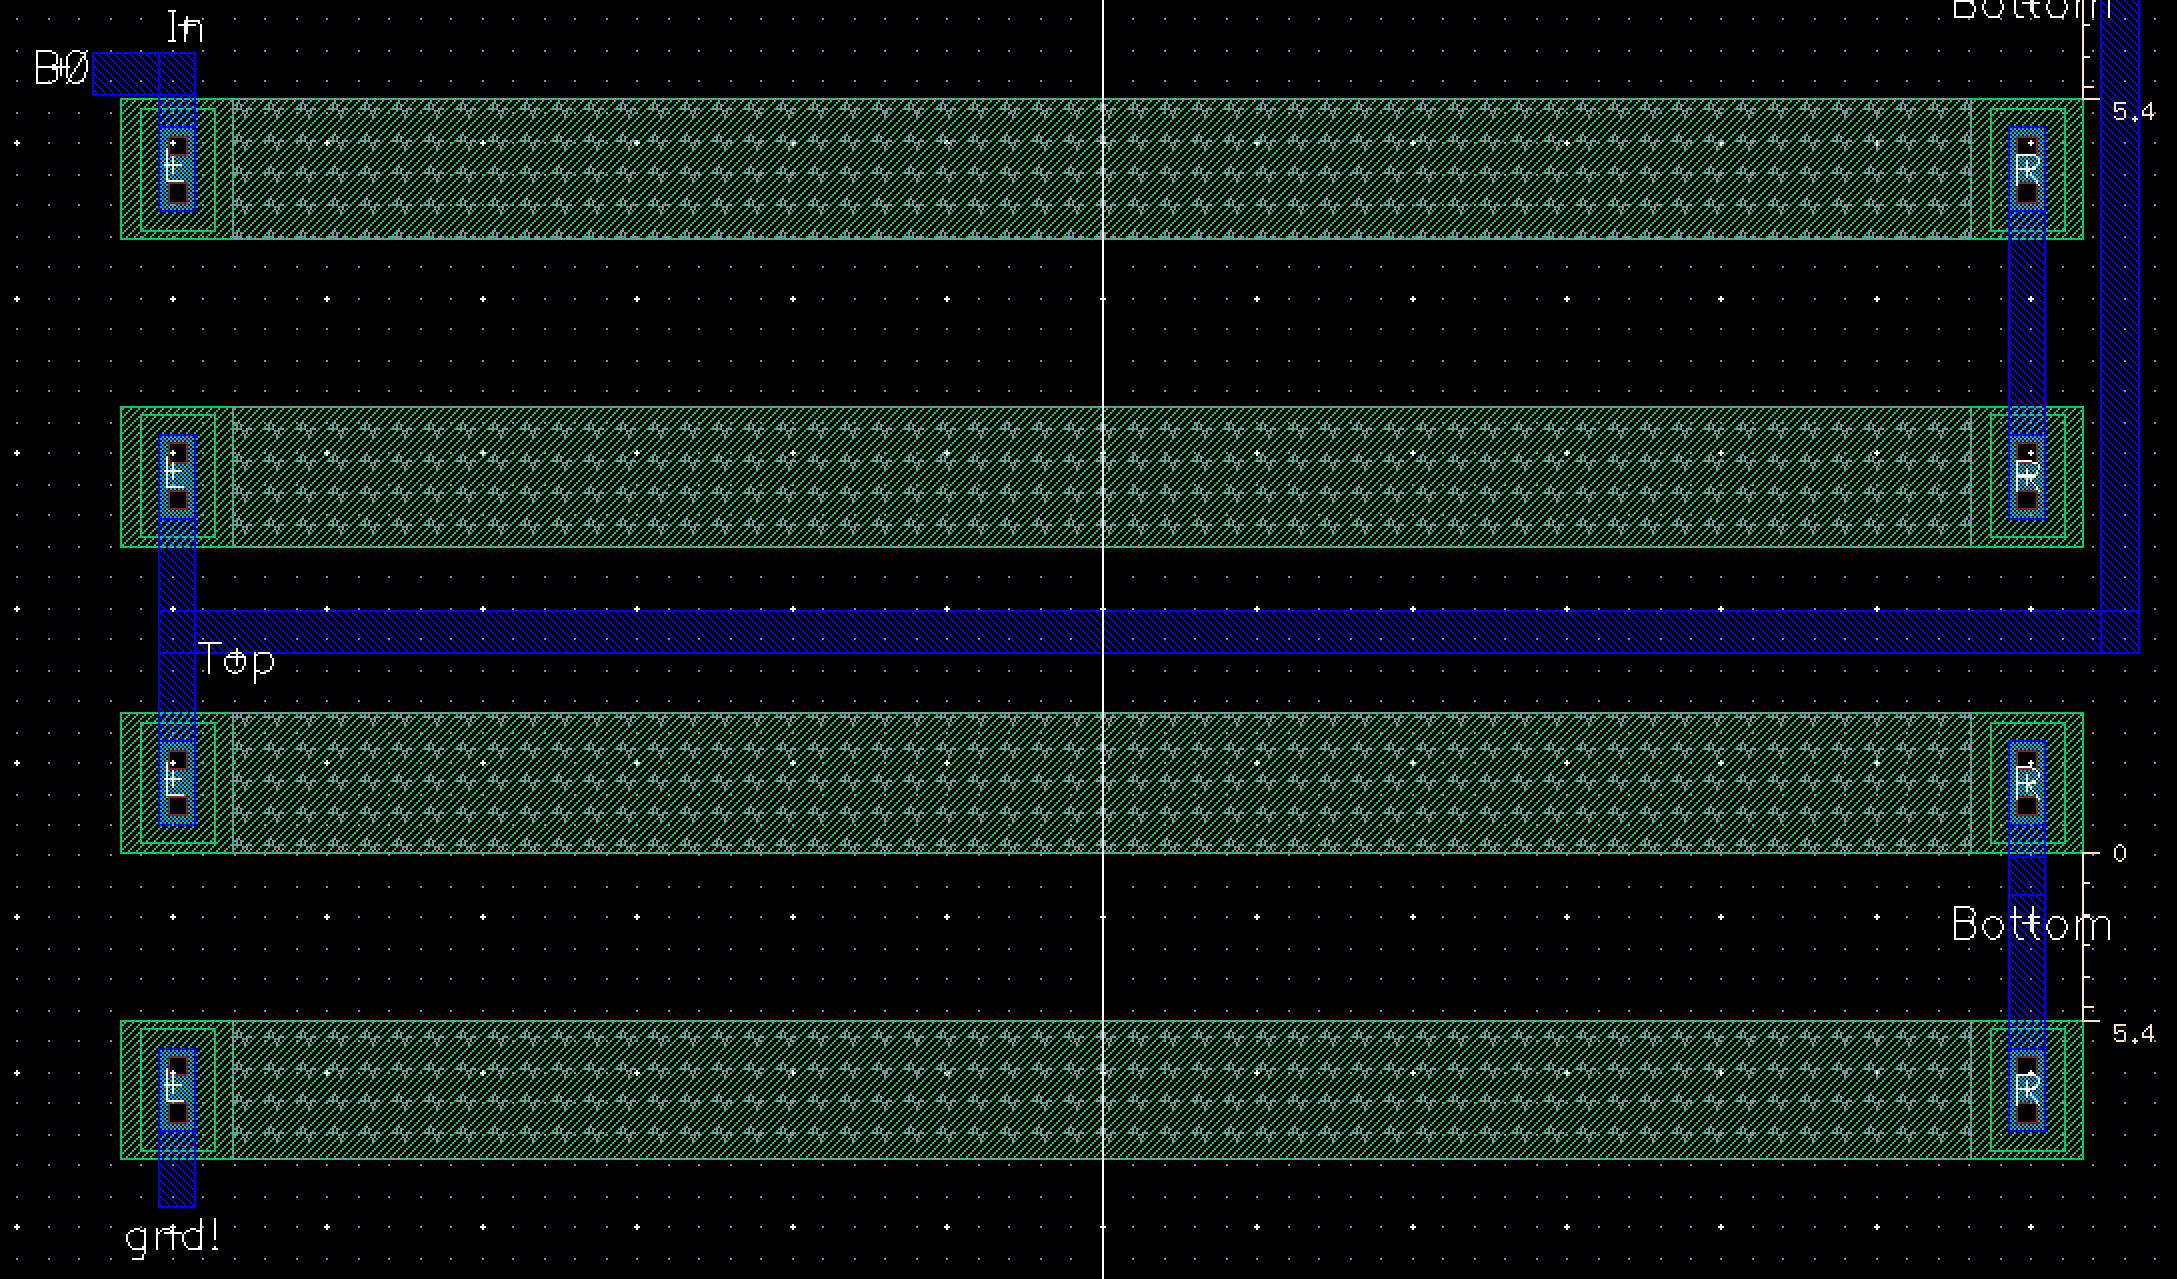 Shows layout close-up of 1-bit DAC Component